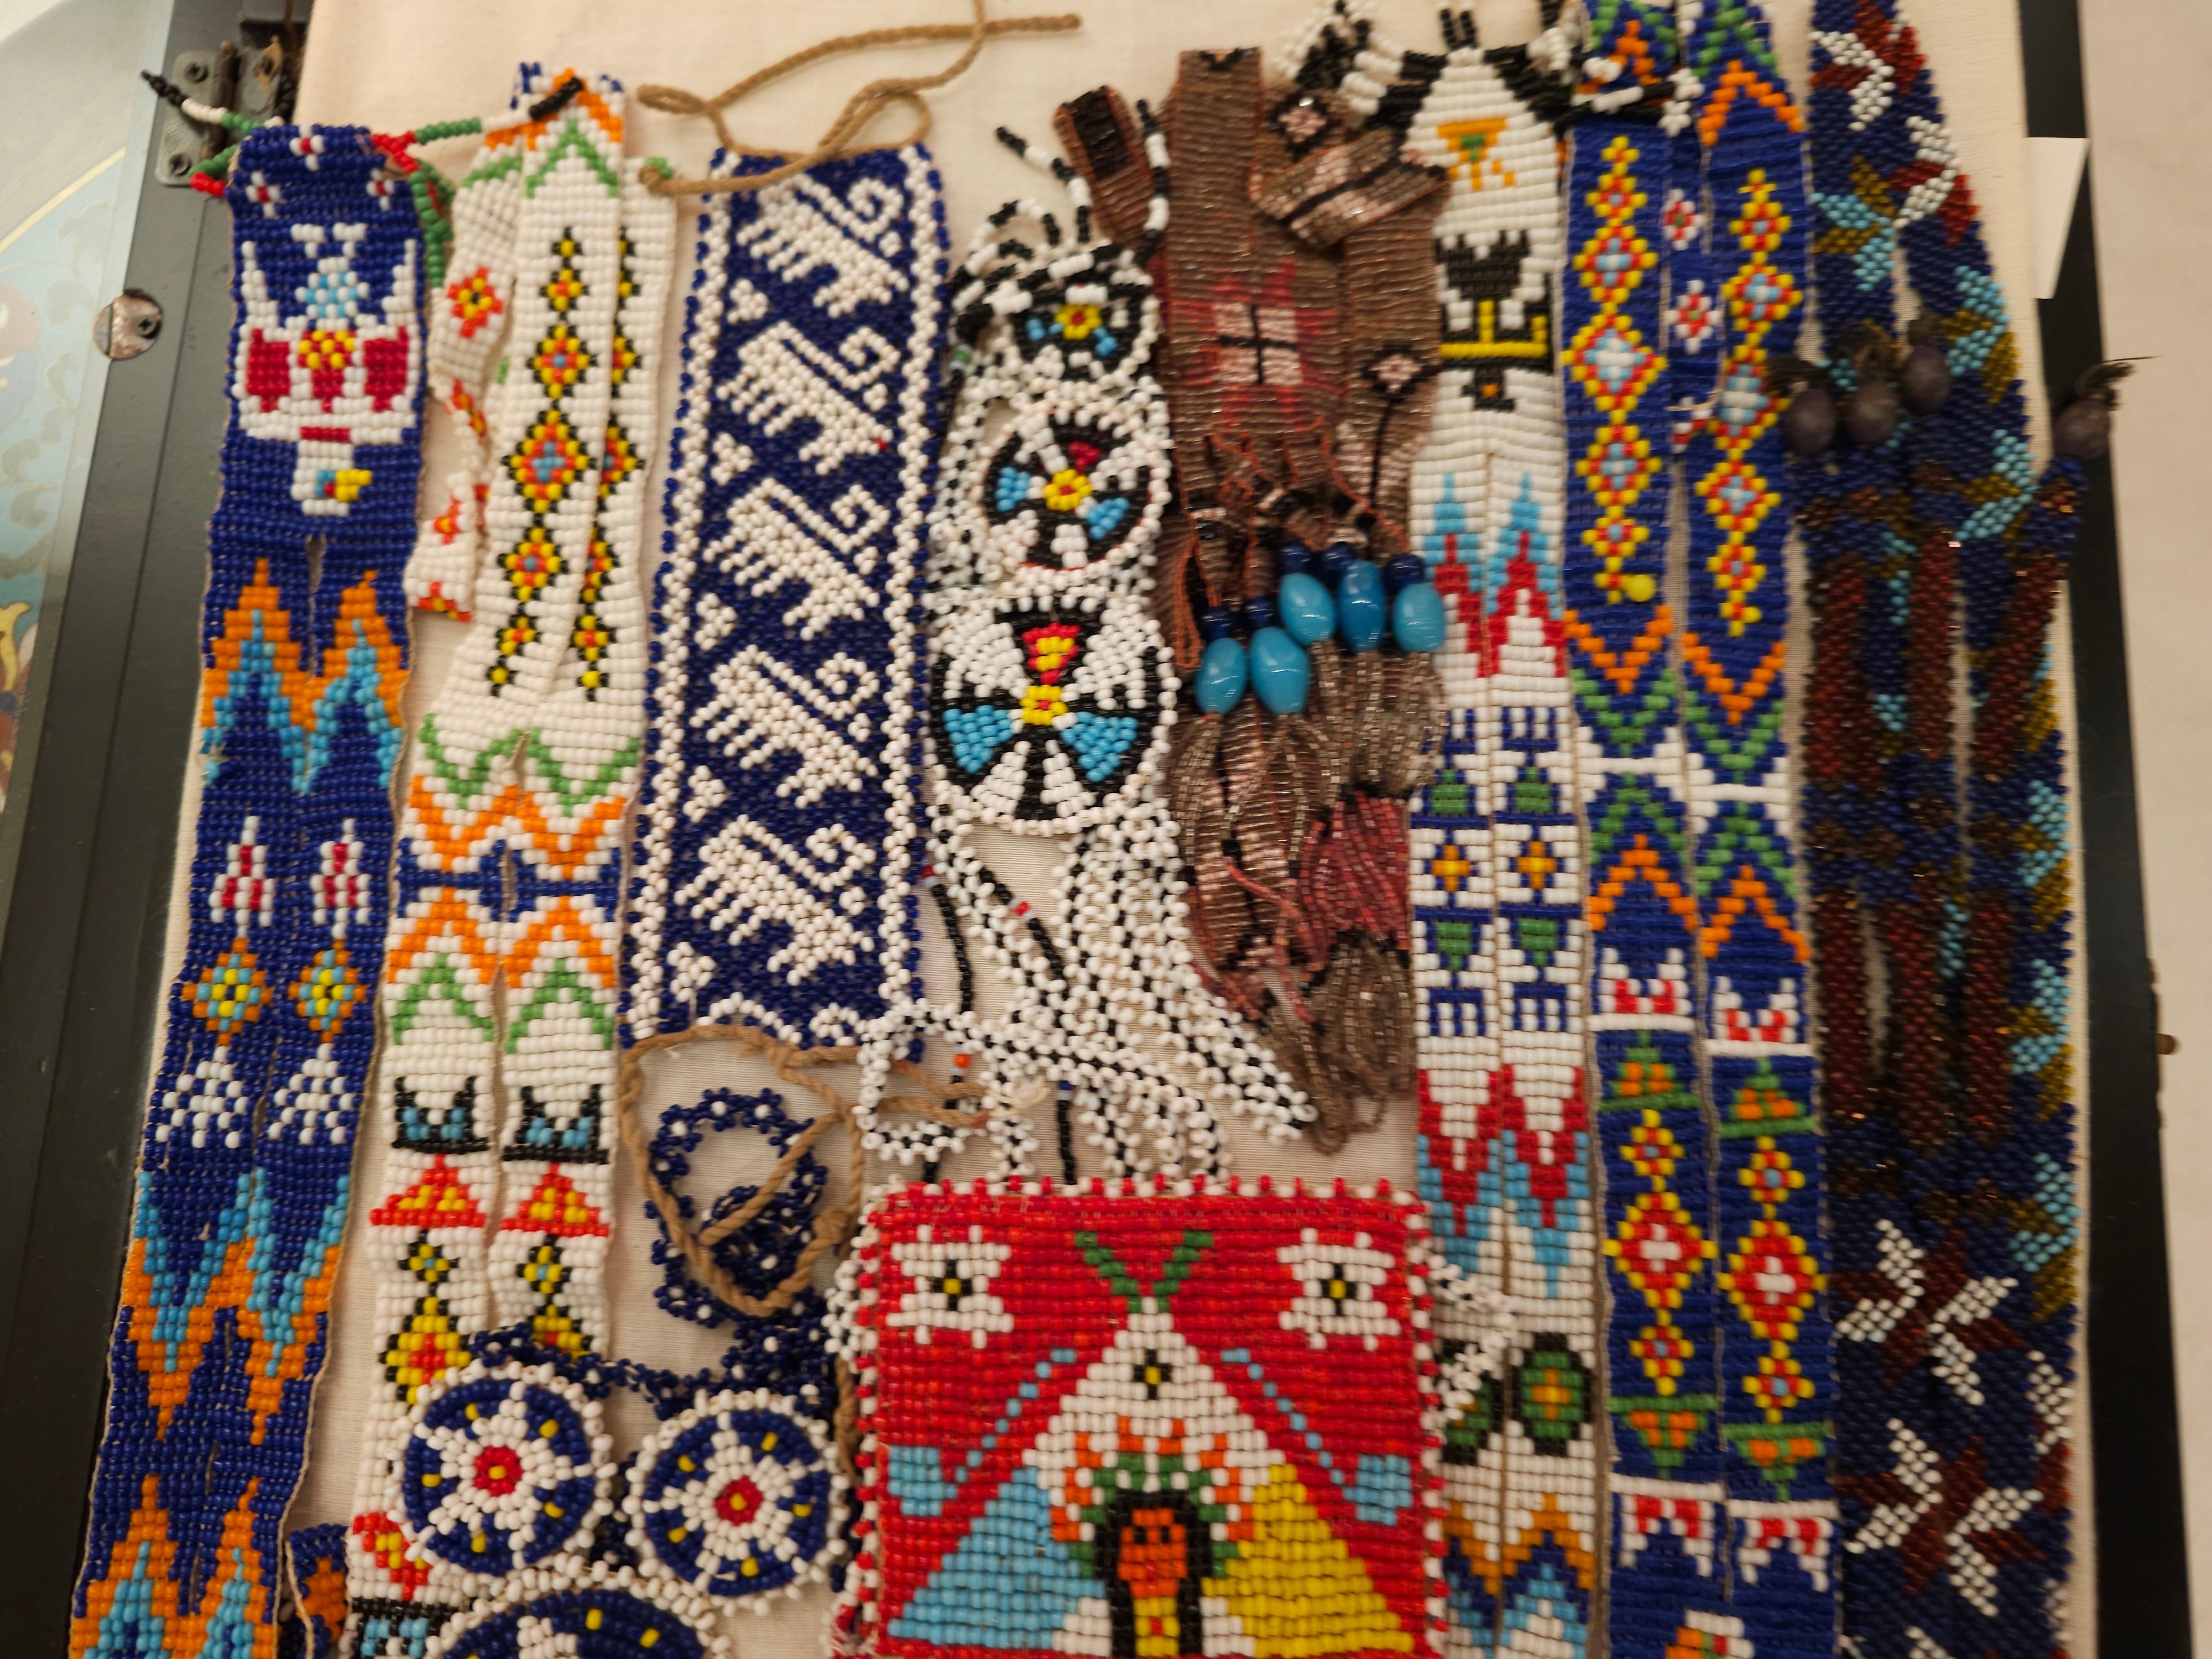   Native American Navajo Beadwork Necklace Collection Displayed in a Shadow Box 1